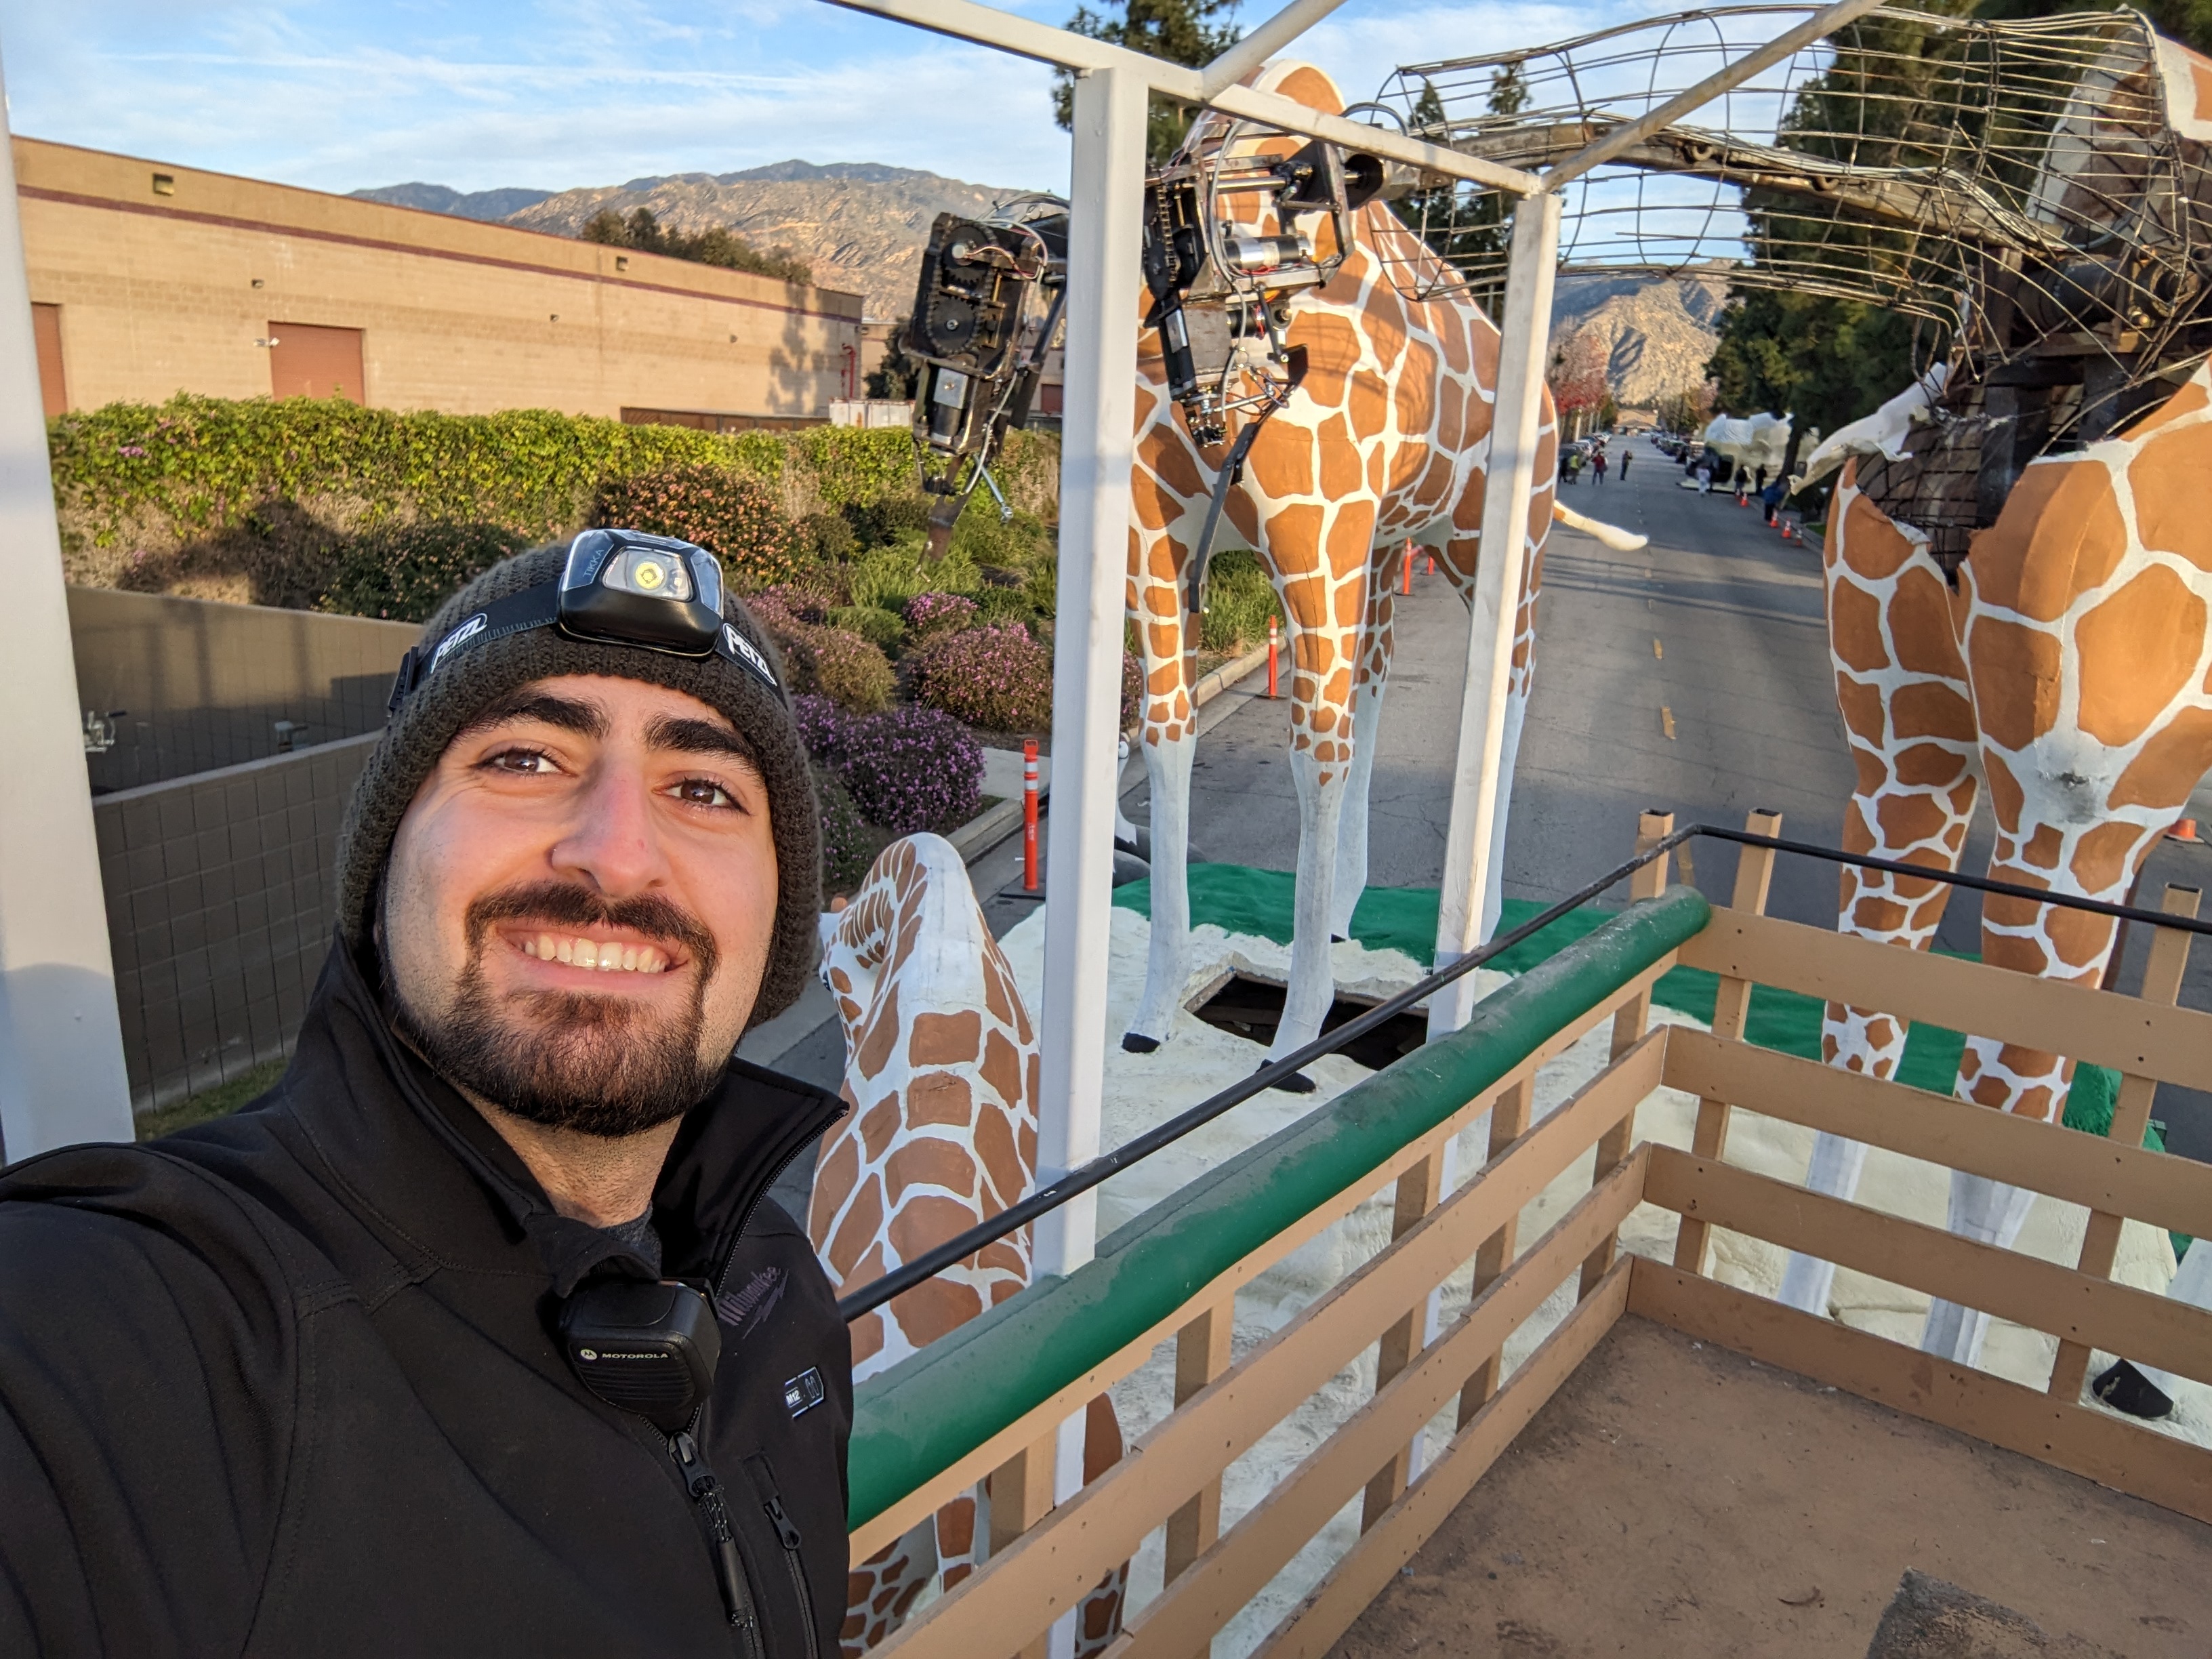 Me in the back of the safari truck taking a selfie with the giraffes